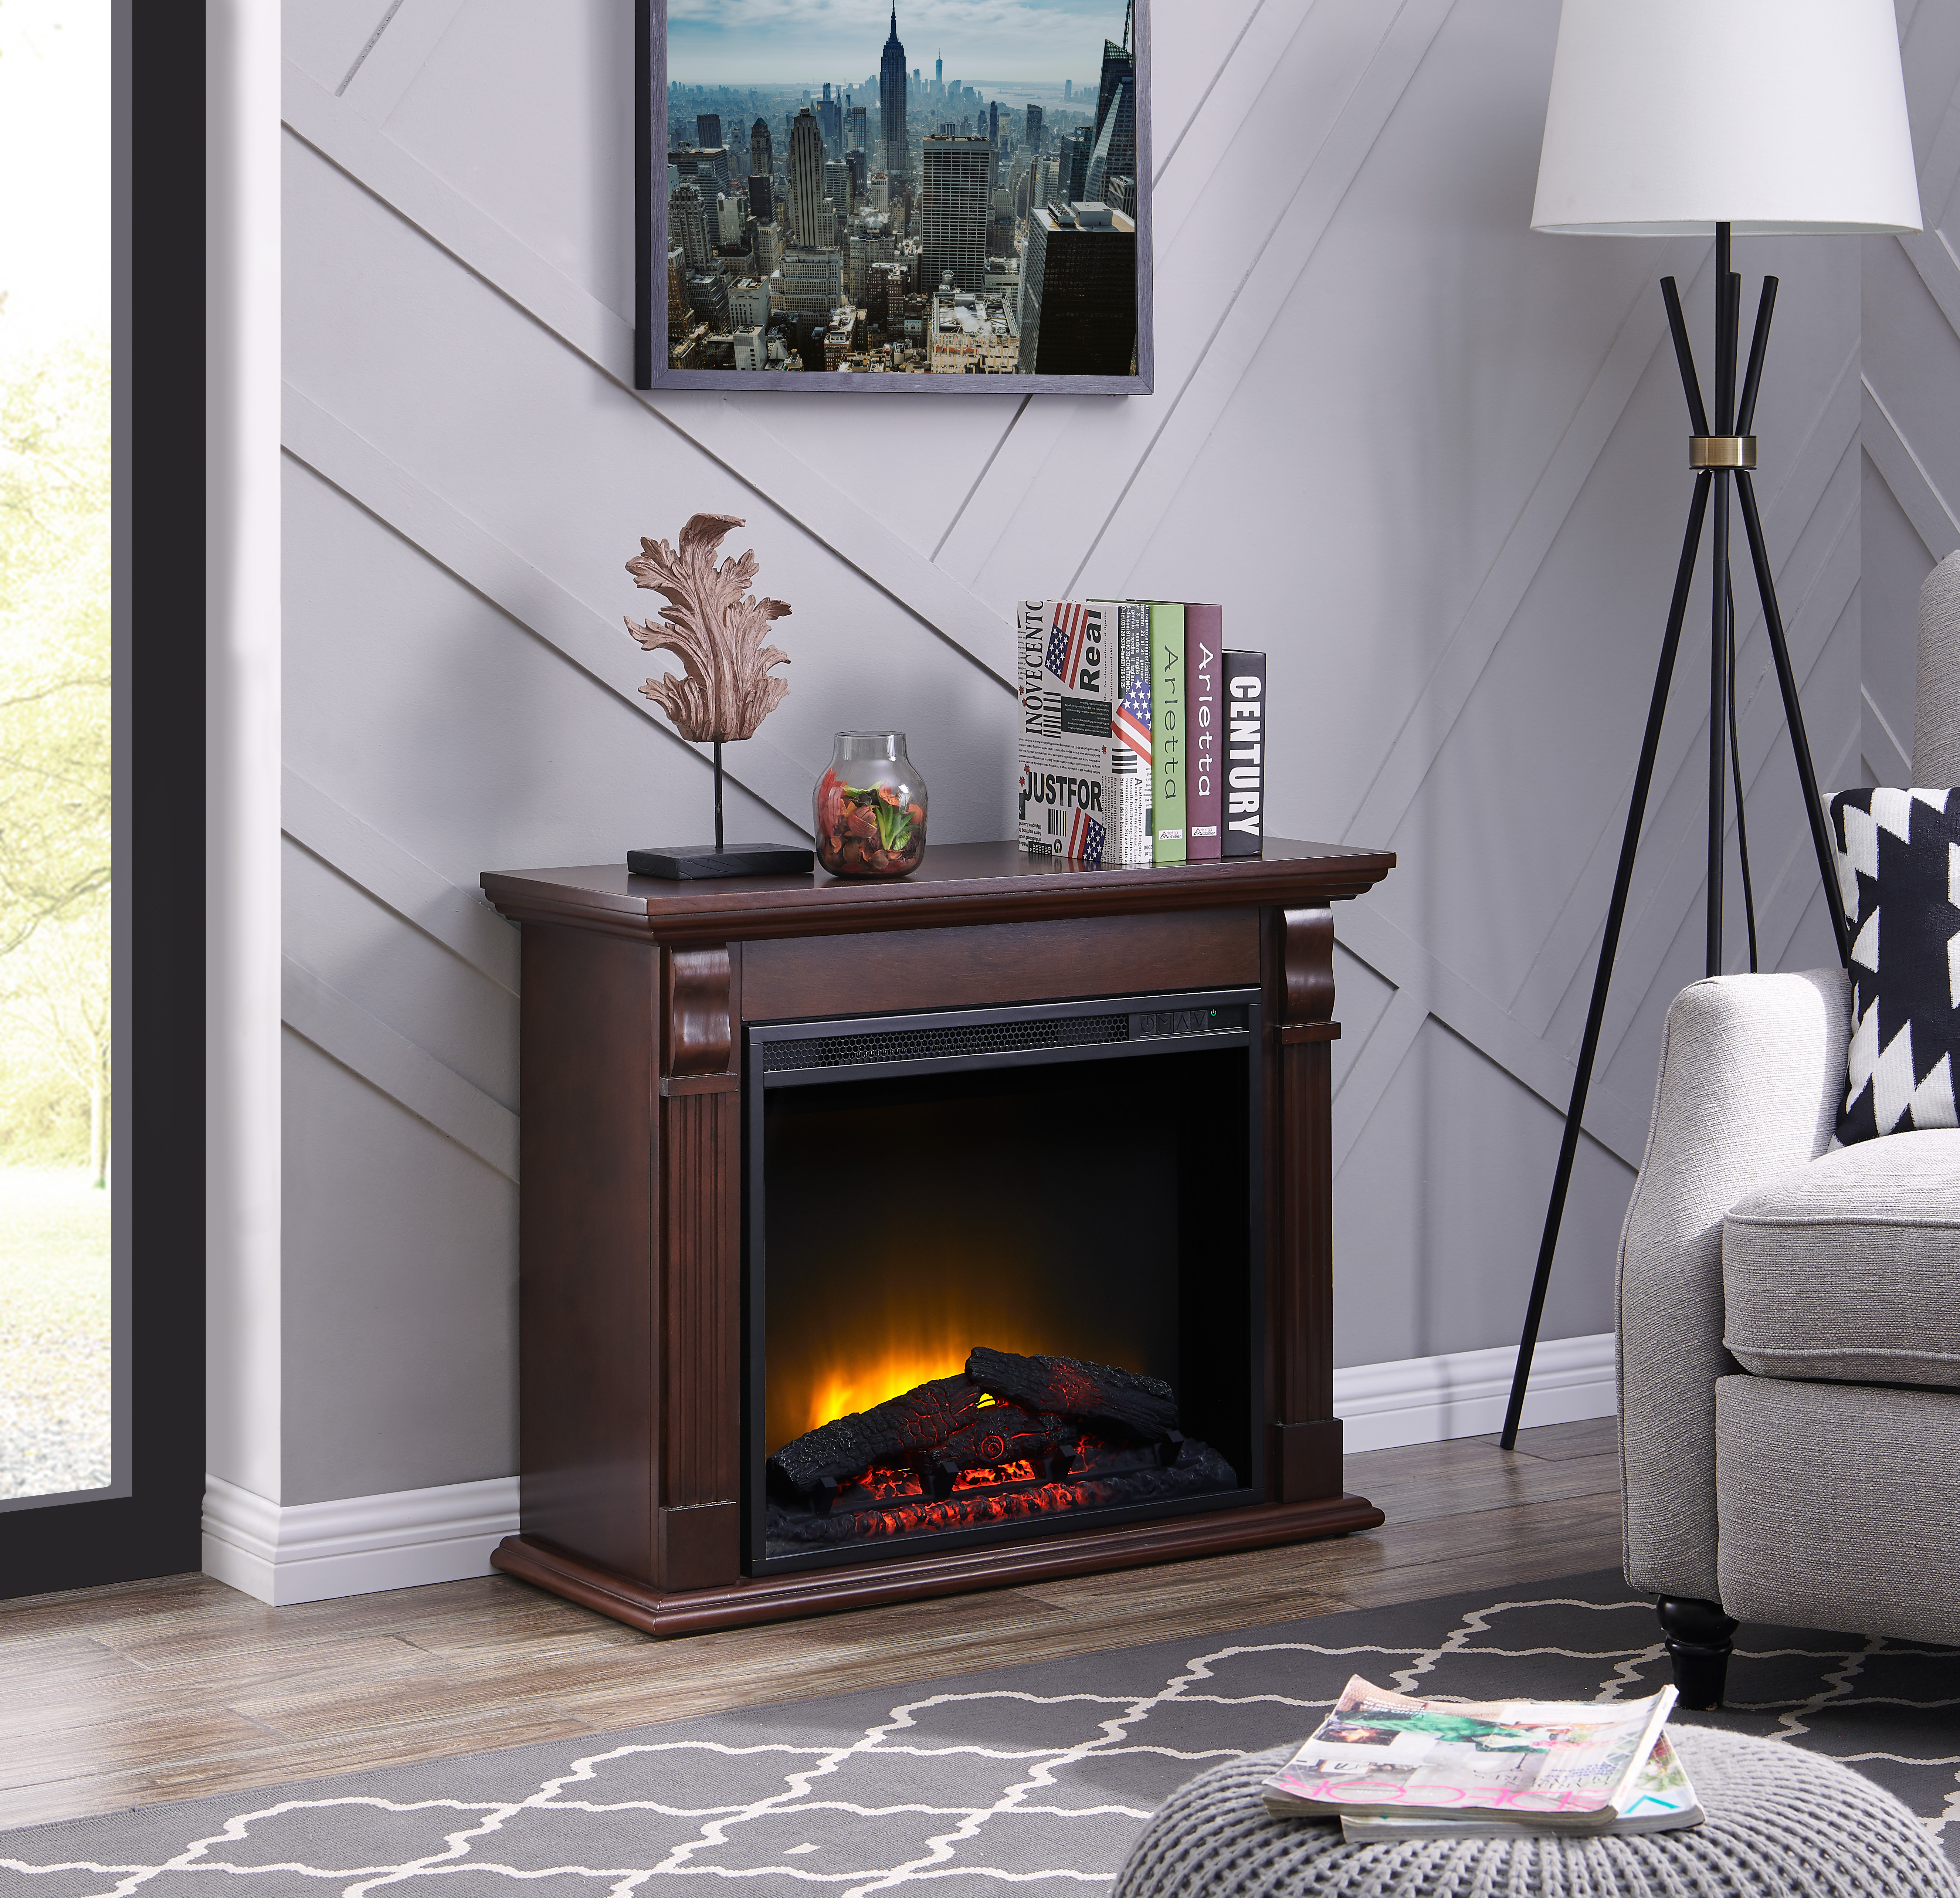 60 Inch Tall Electric Fireplace Best Of Bold Flame 33 46 Inch Electric Fireplace In Chestnut